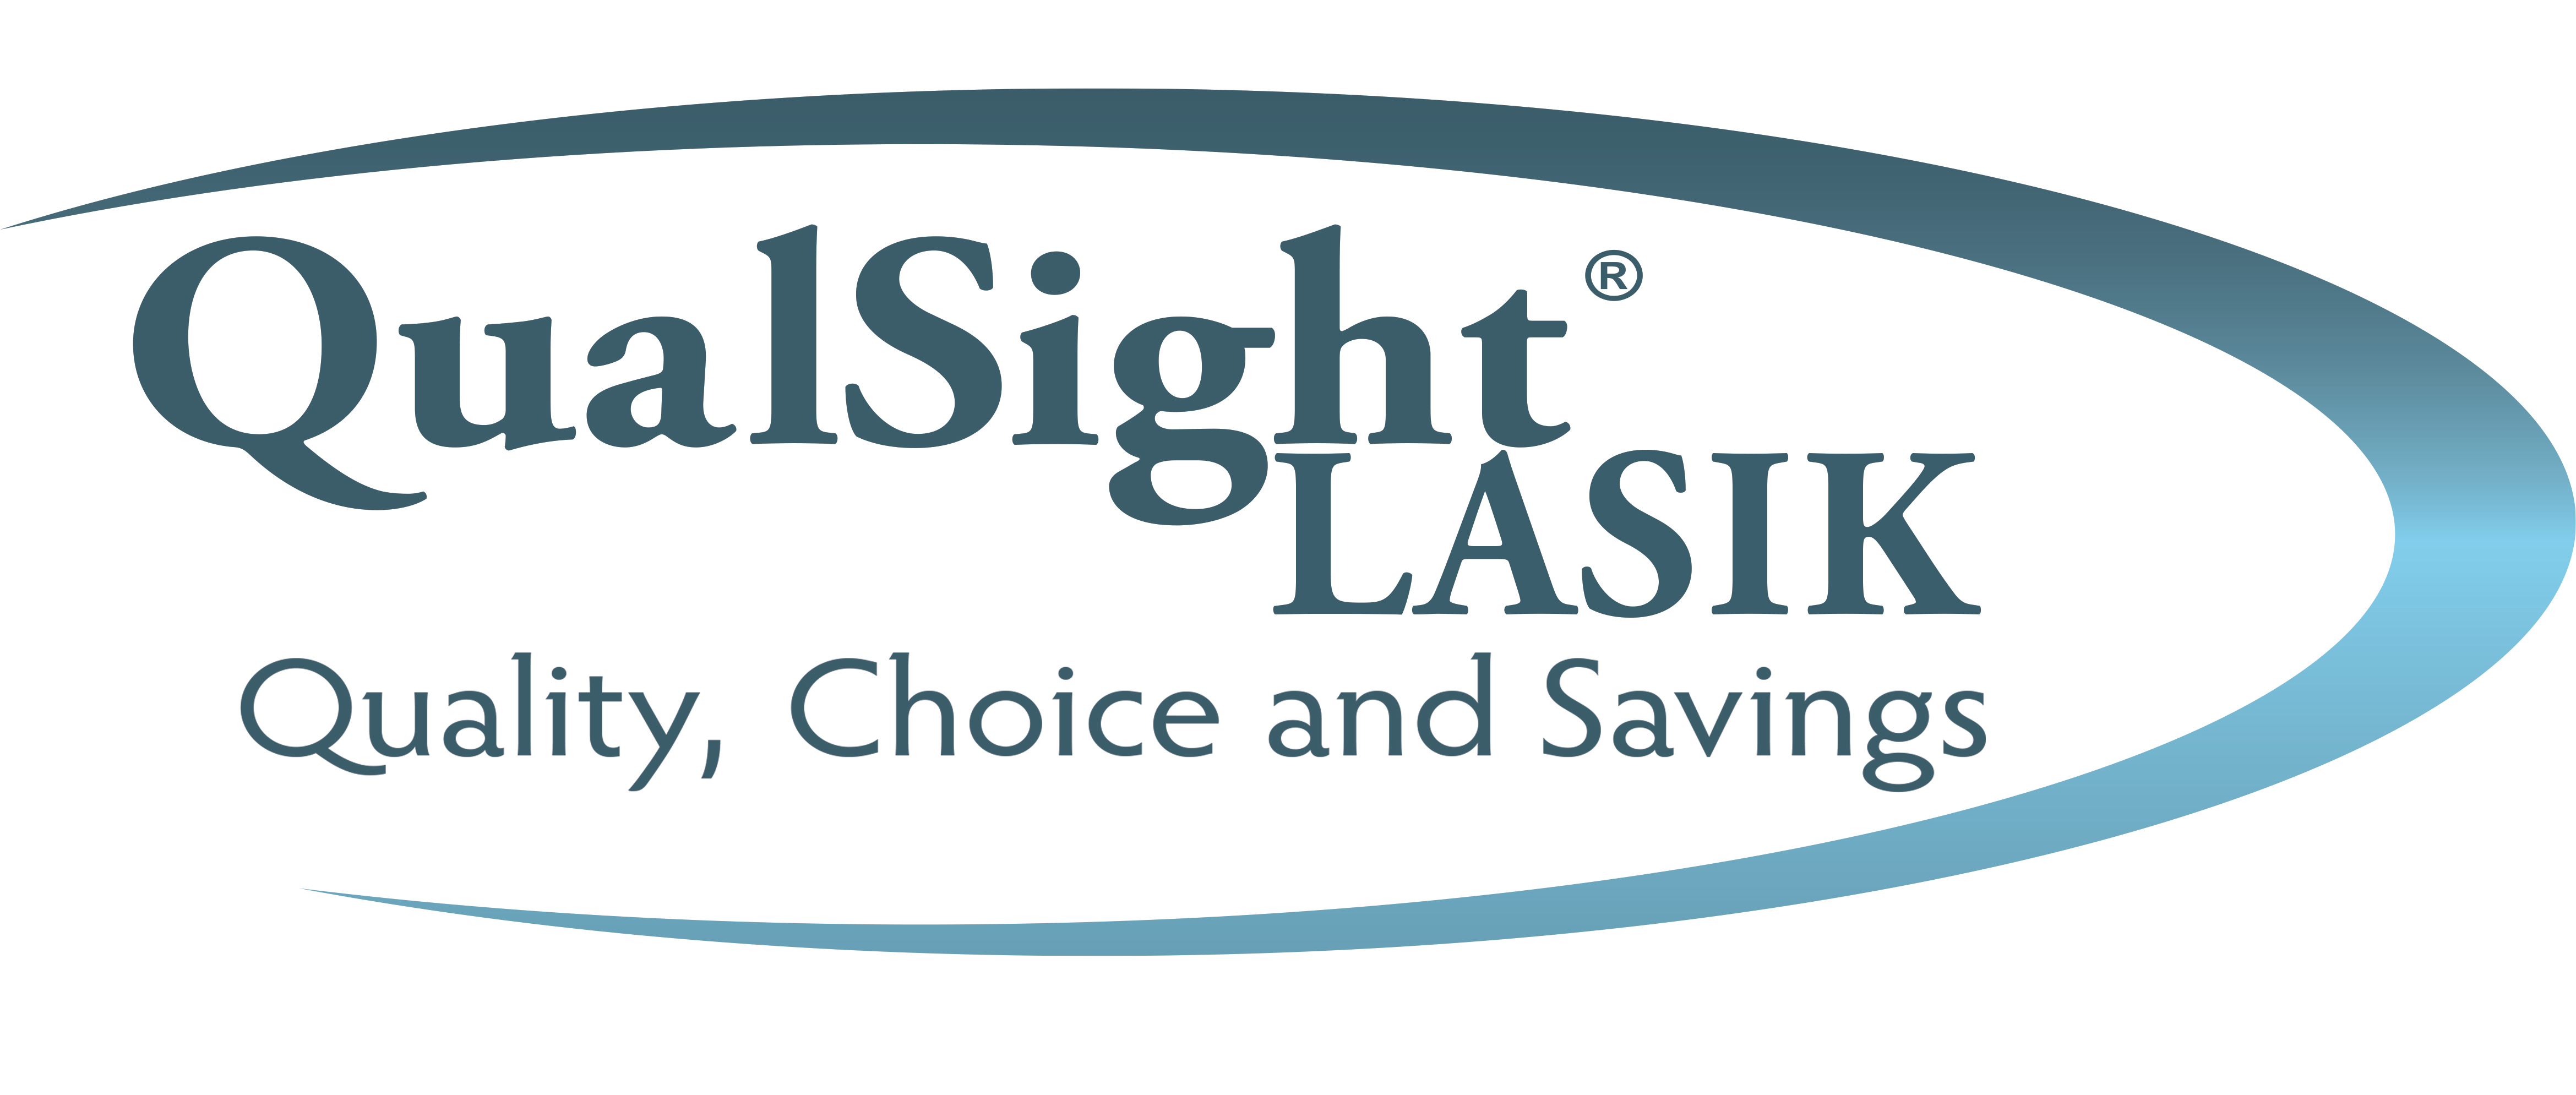 Save Up to 50% with LASIK Providers Nationwide